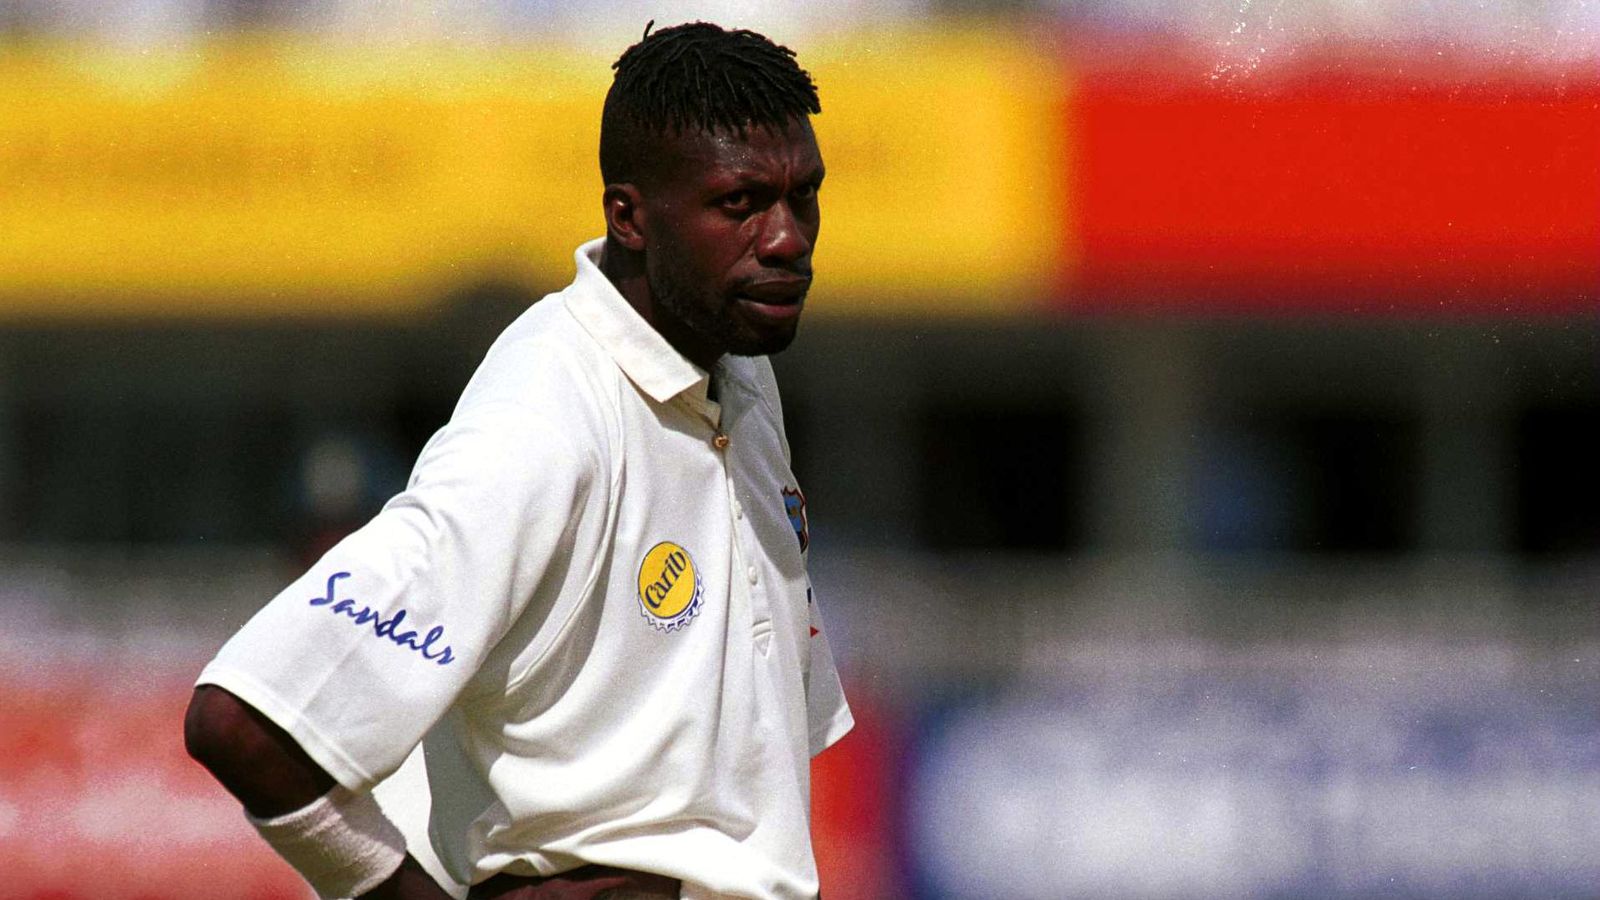 Curtly Ambrose fast bowler of west indies cricket team